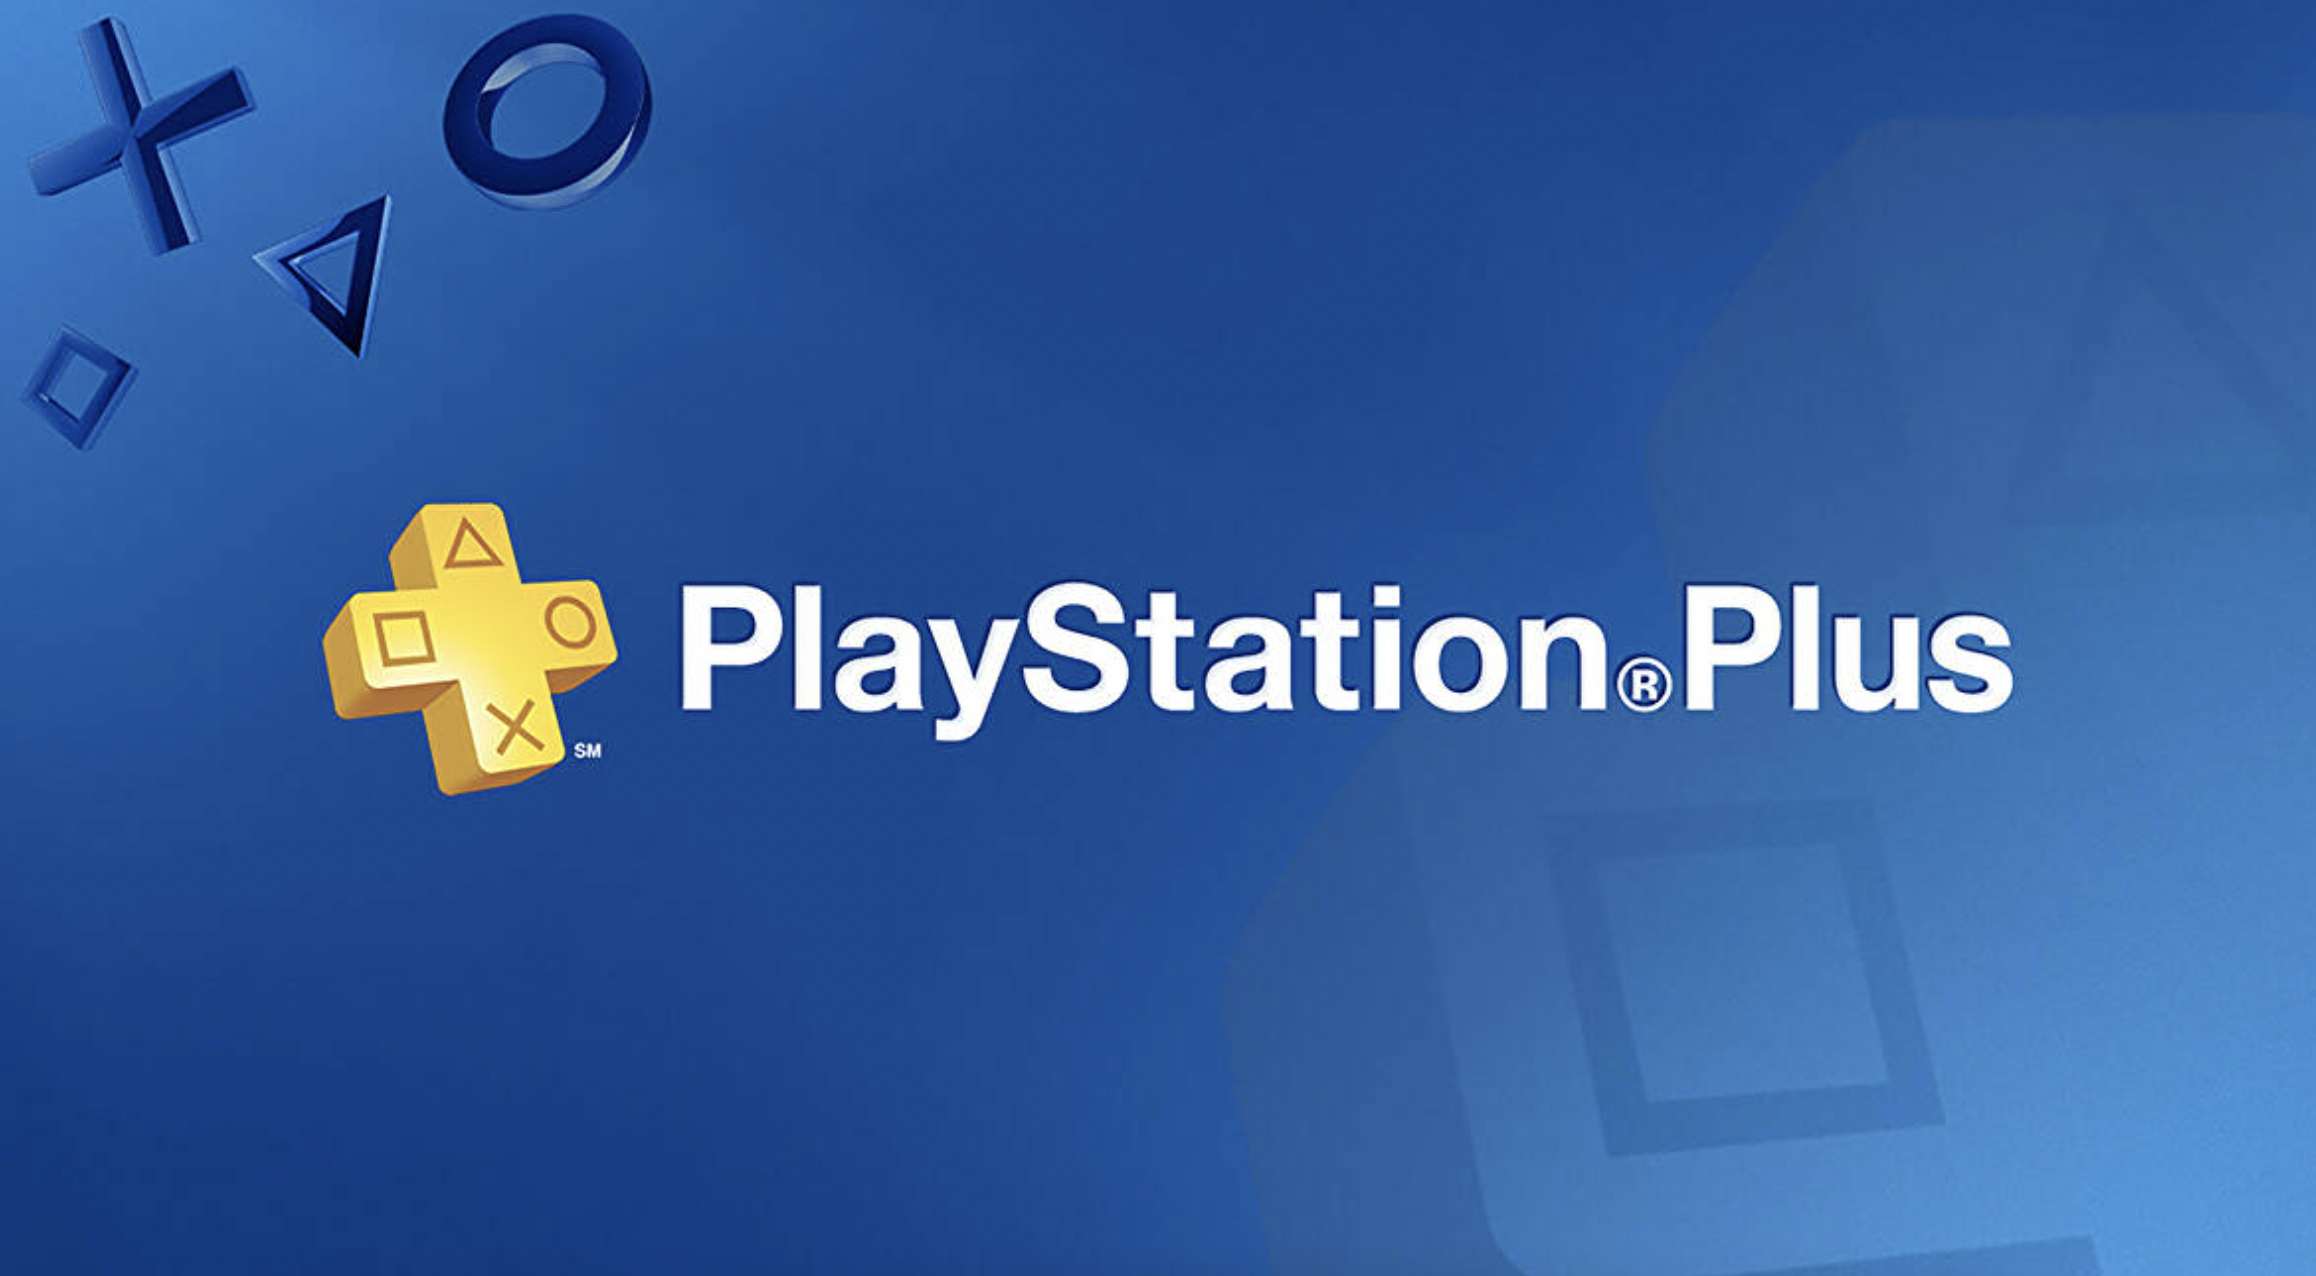 PlayStation Plus Premium Expands into North America with Dozens of New Titles